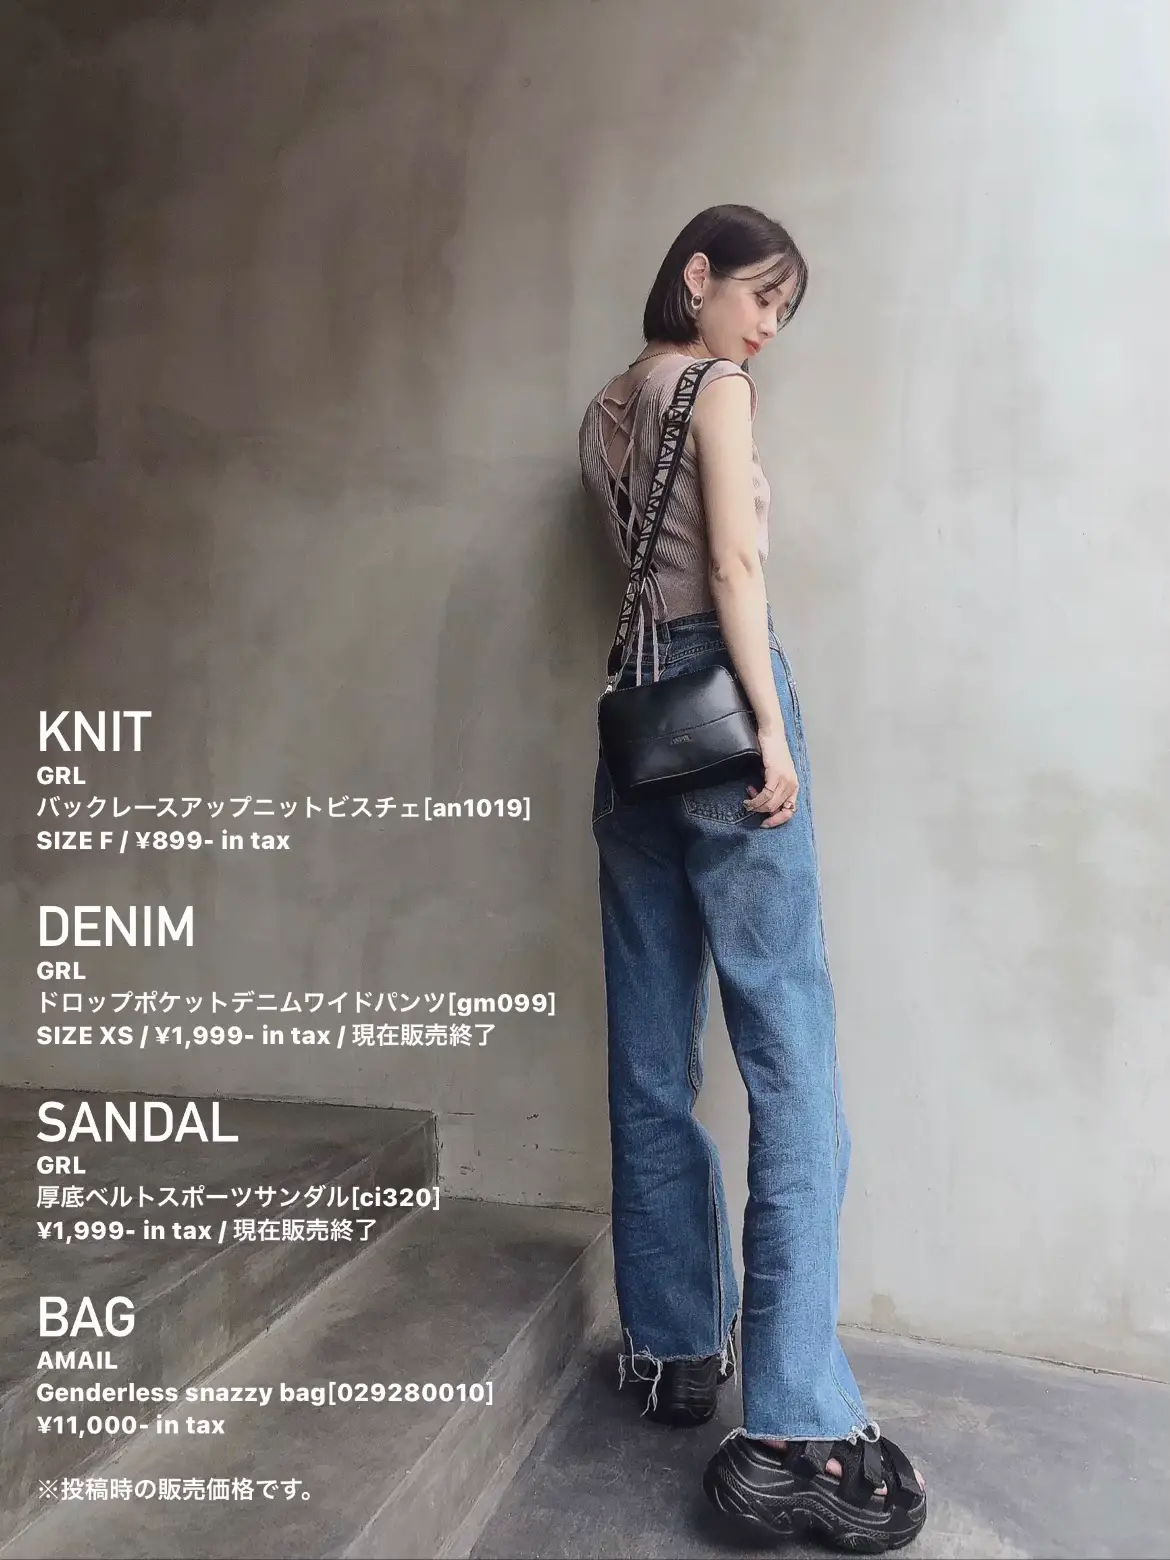 Back view intense knit   | Gallery posted by あんころ | Lemon8